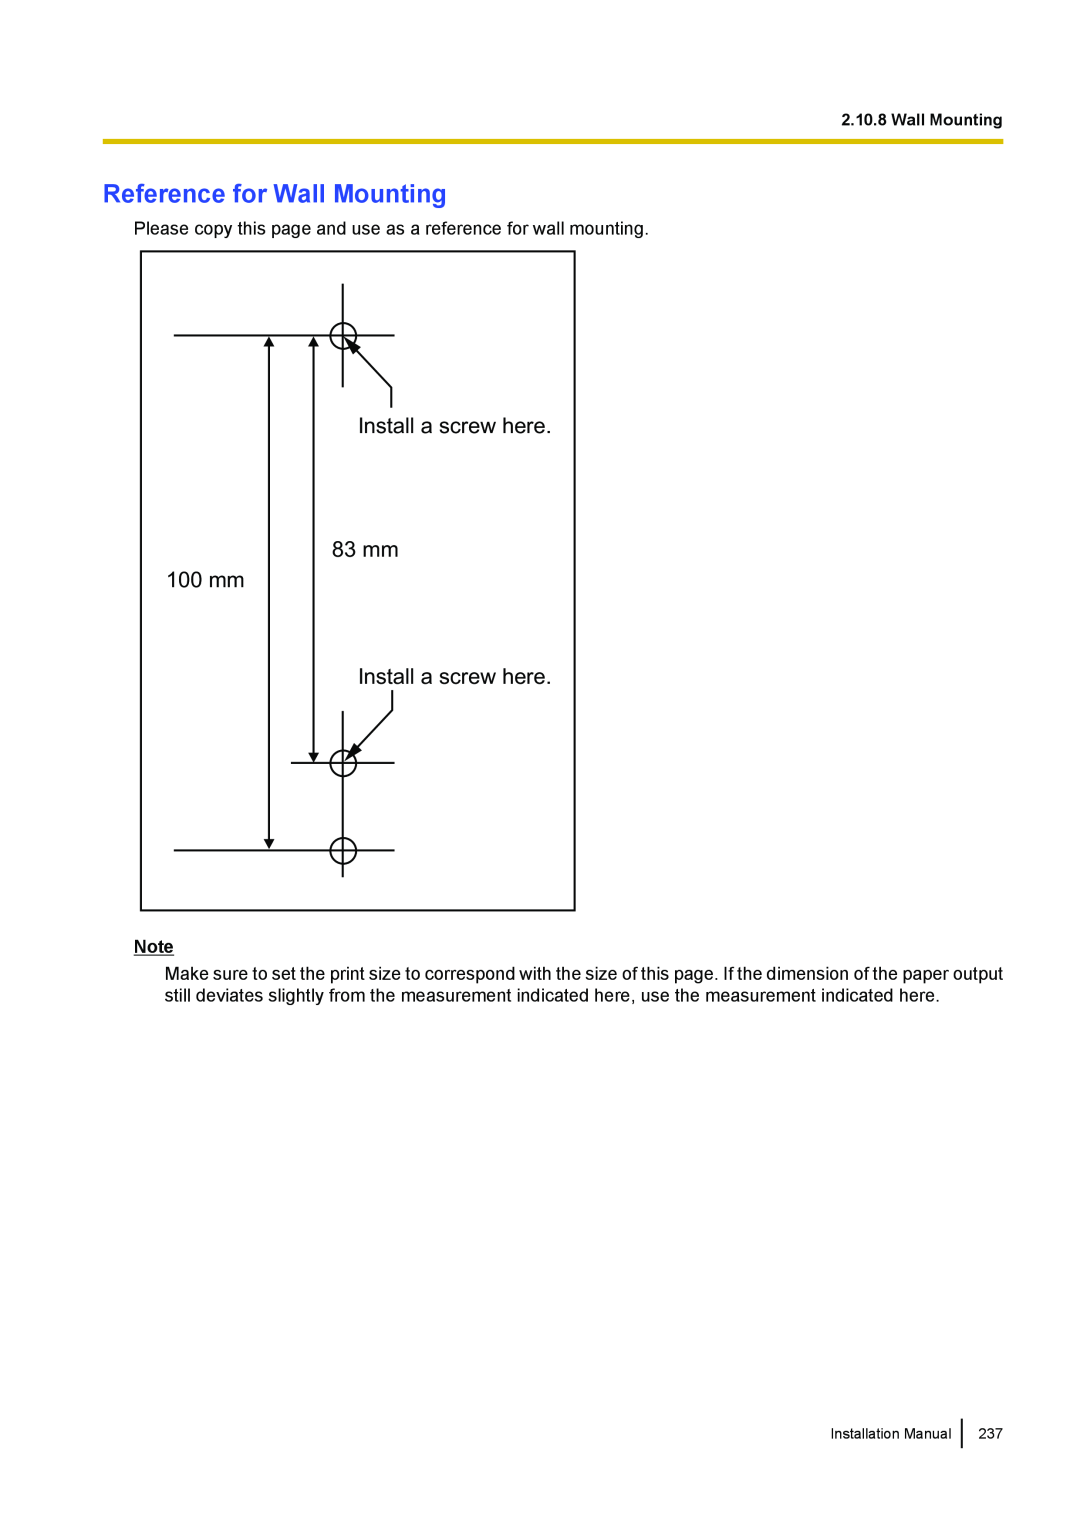 Panasonic KX-TDA100 installation manual Reference for Wall Mounting, Install a screw here, 100 mm, 83 mm 